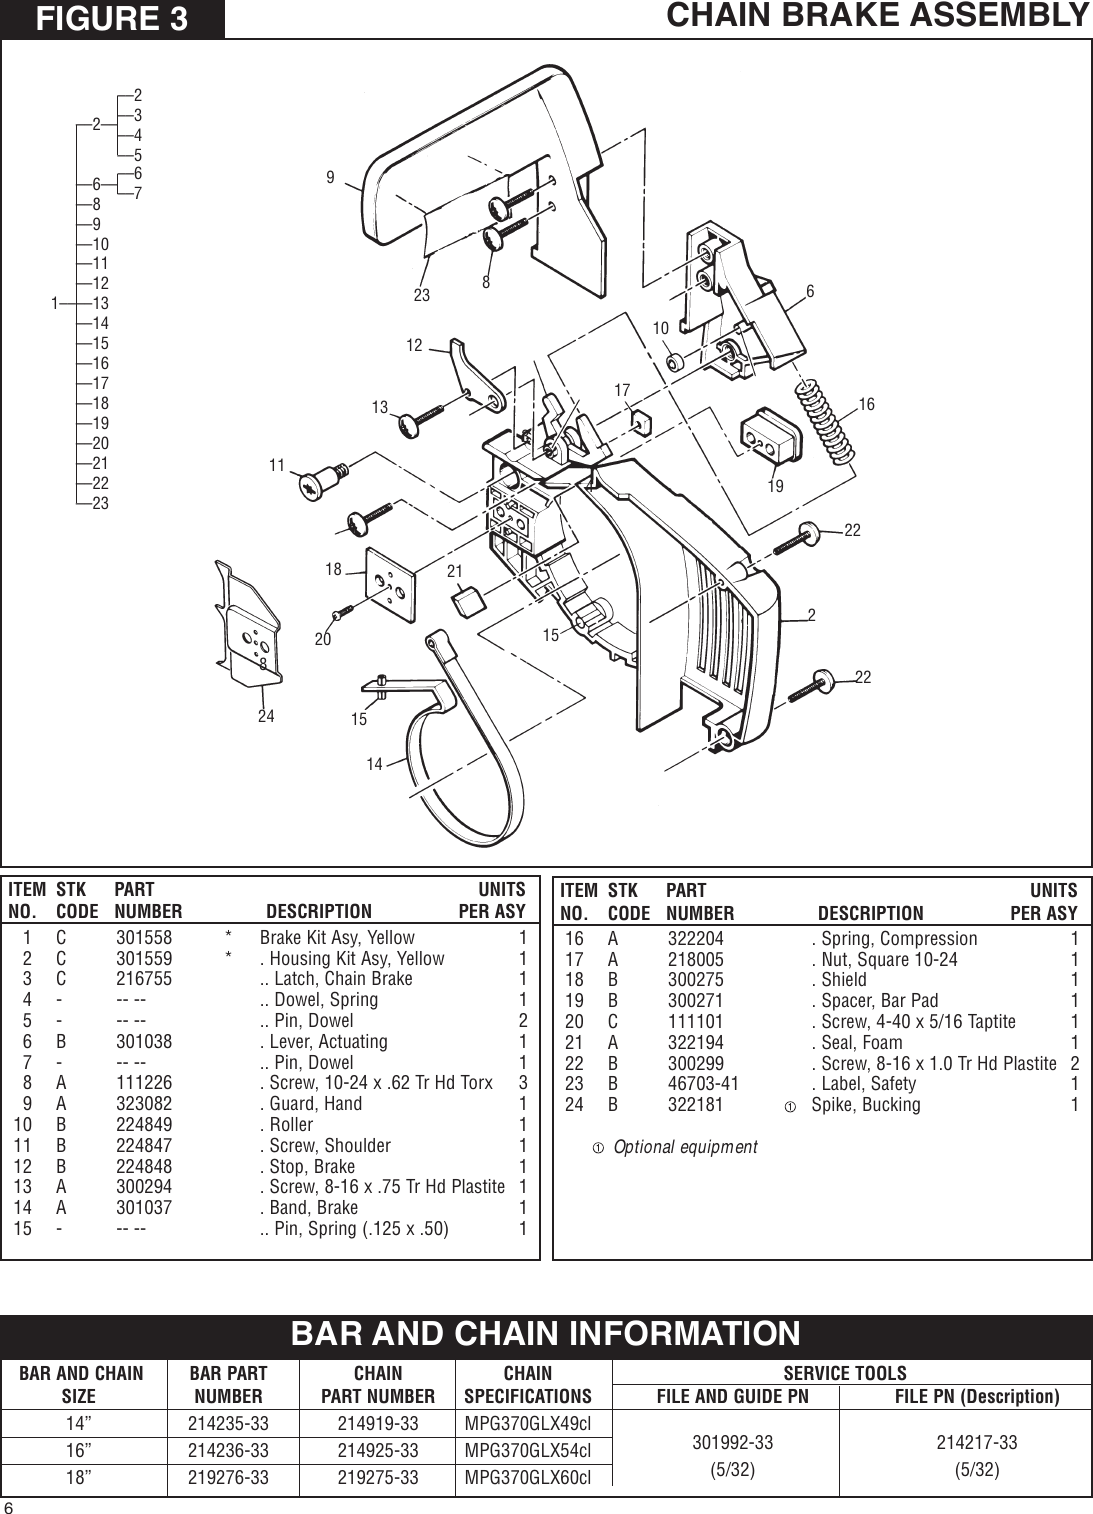 Page 6 of 8 - Mcculloch Mcculloch-Ms1635Av-Illustrated-Parts-Breakdown- ManualsLib - Makes It Easy To Find Manuals Online!  Mcculloch-ms1635av-illustrated-parts-breakdown